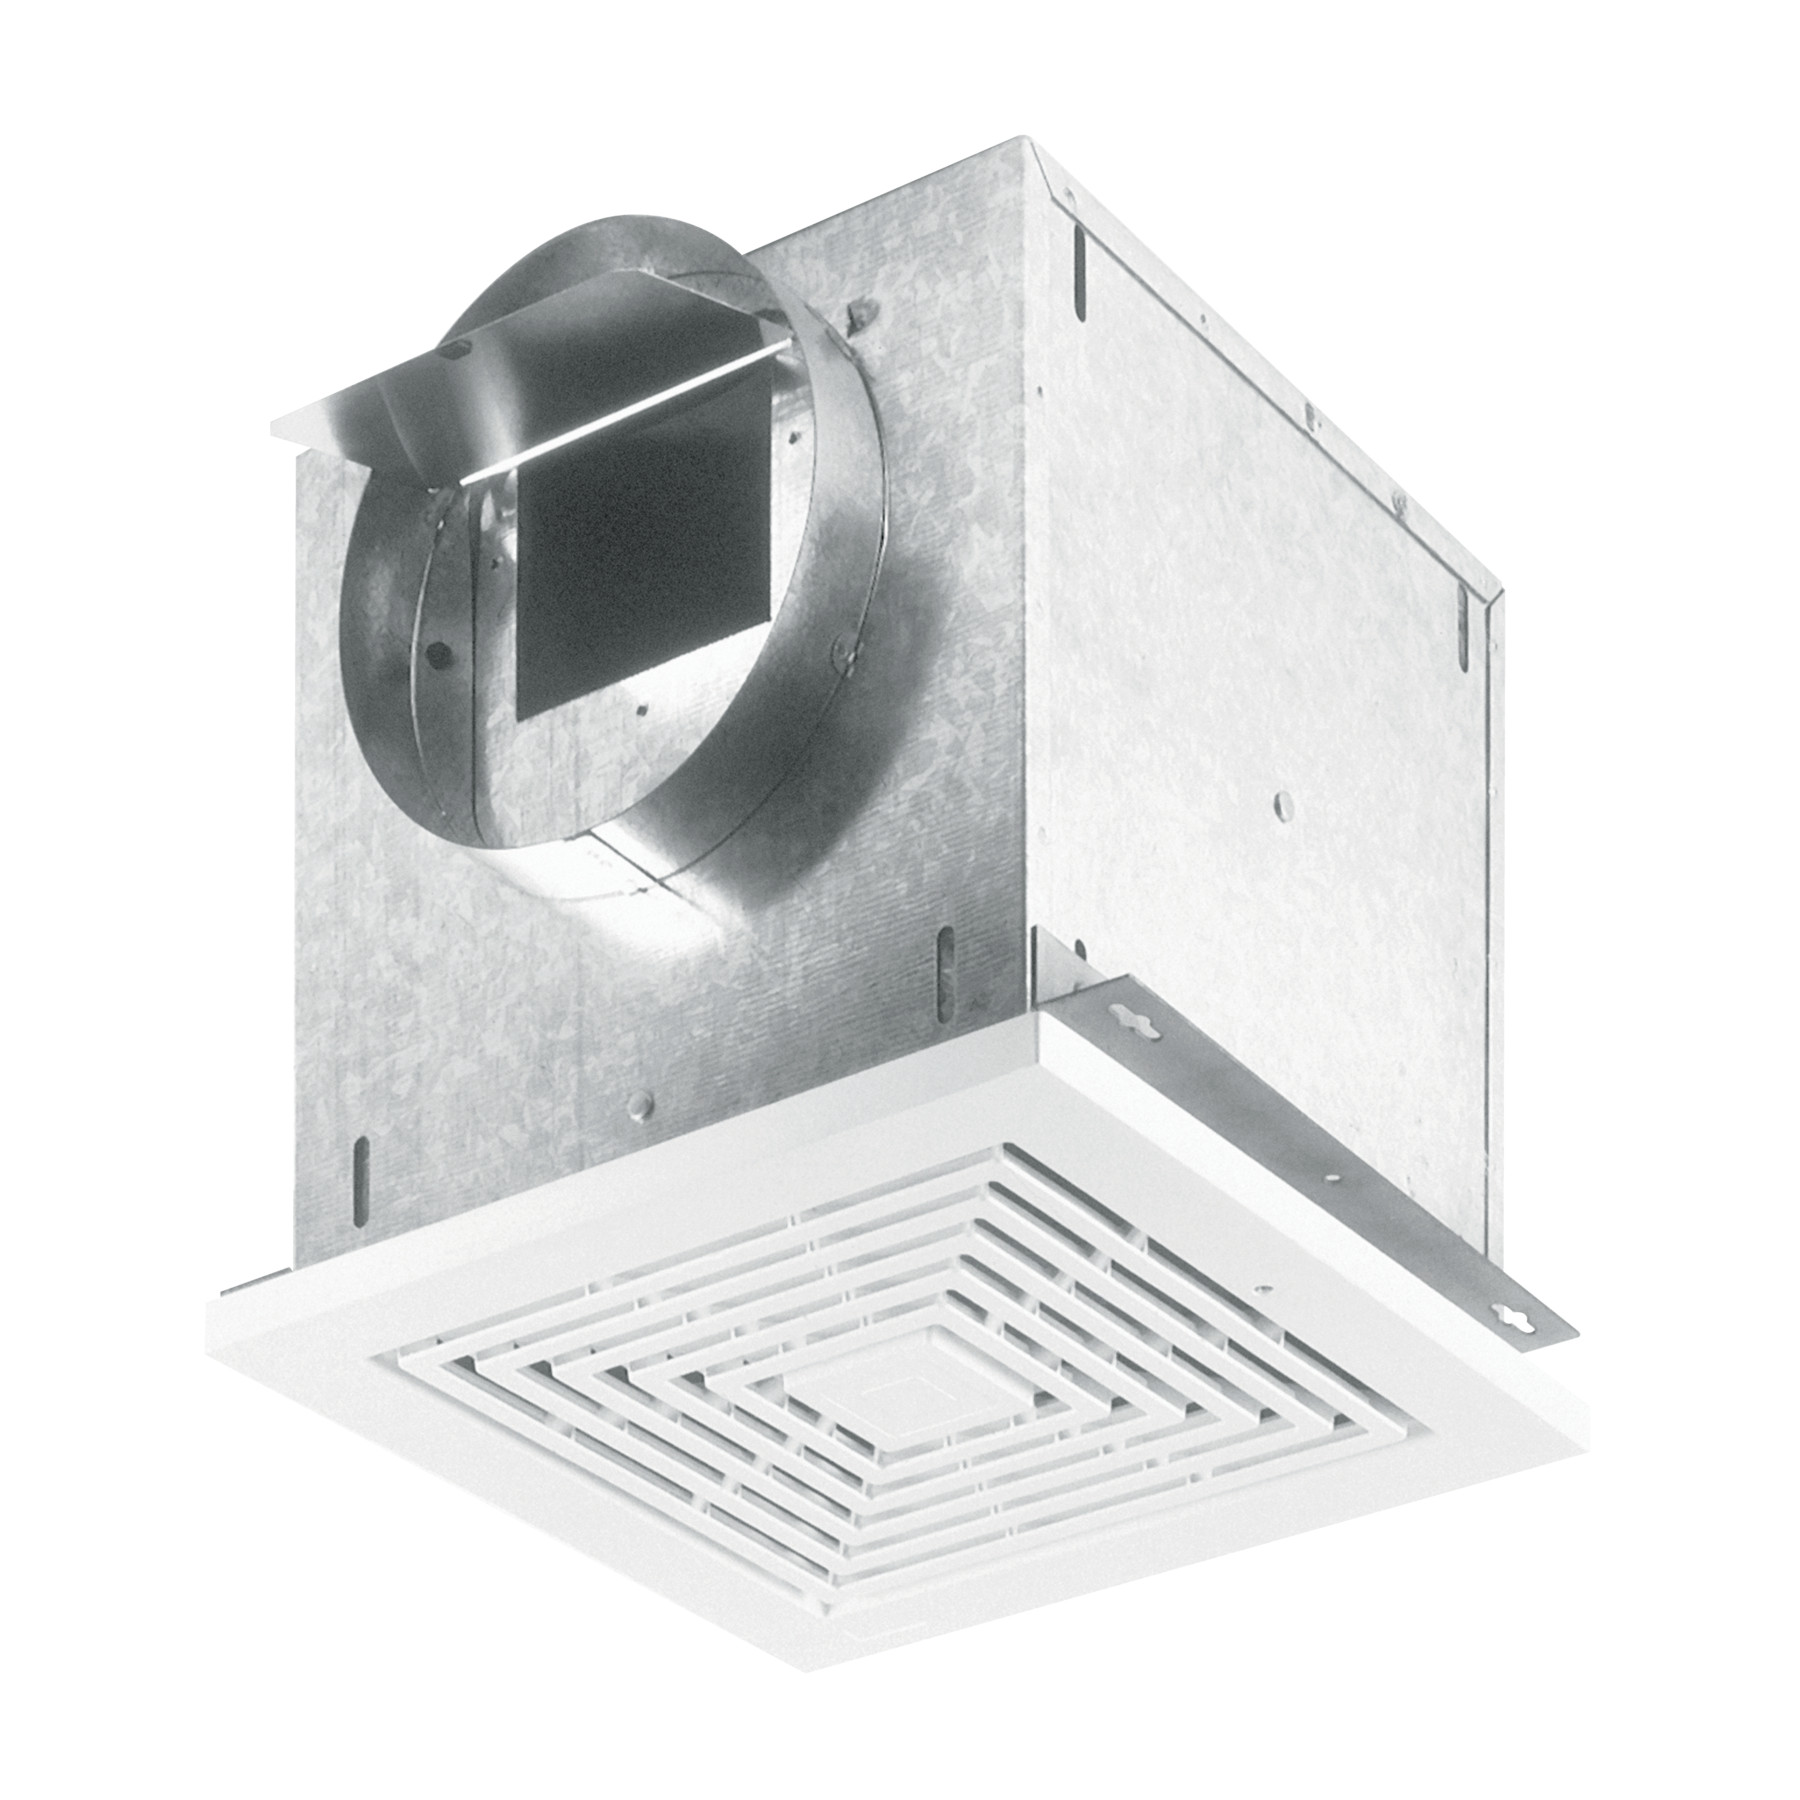 **DISCONTINUED** Broan® LOSONE SELECT™ High Capacity 157 CFM High Capacity Ceiling Mount Ventilation Fan